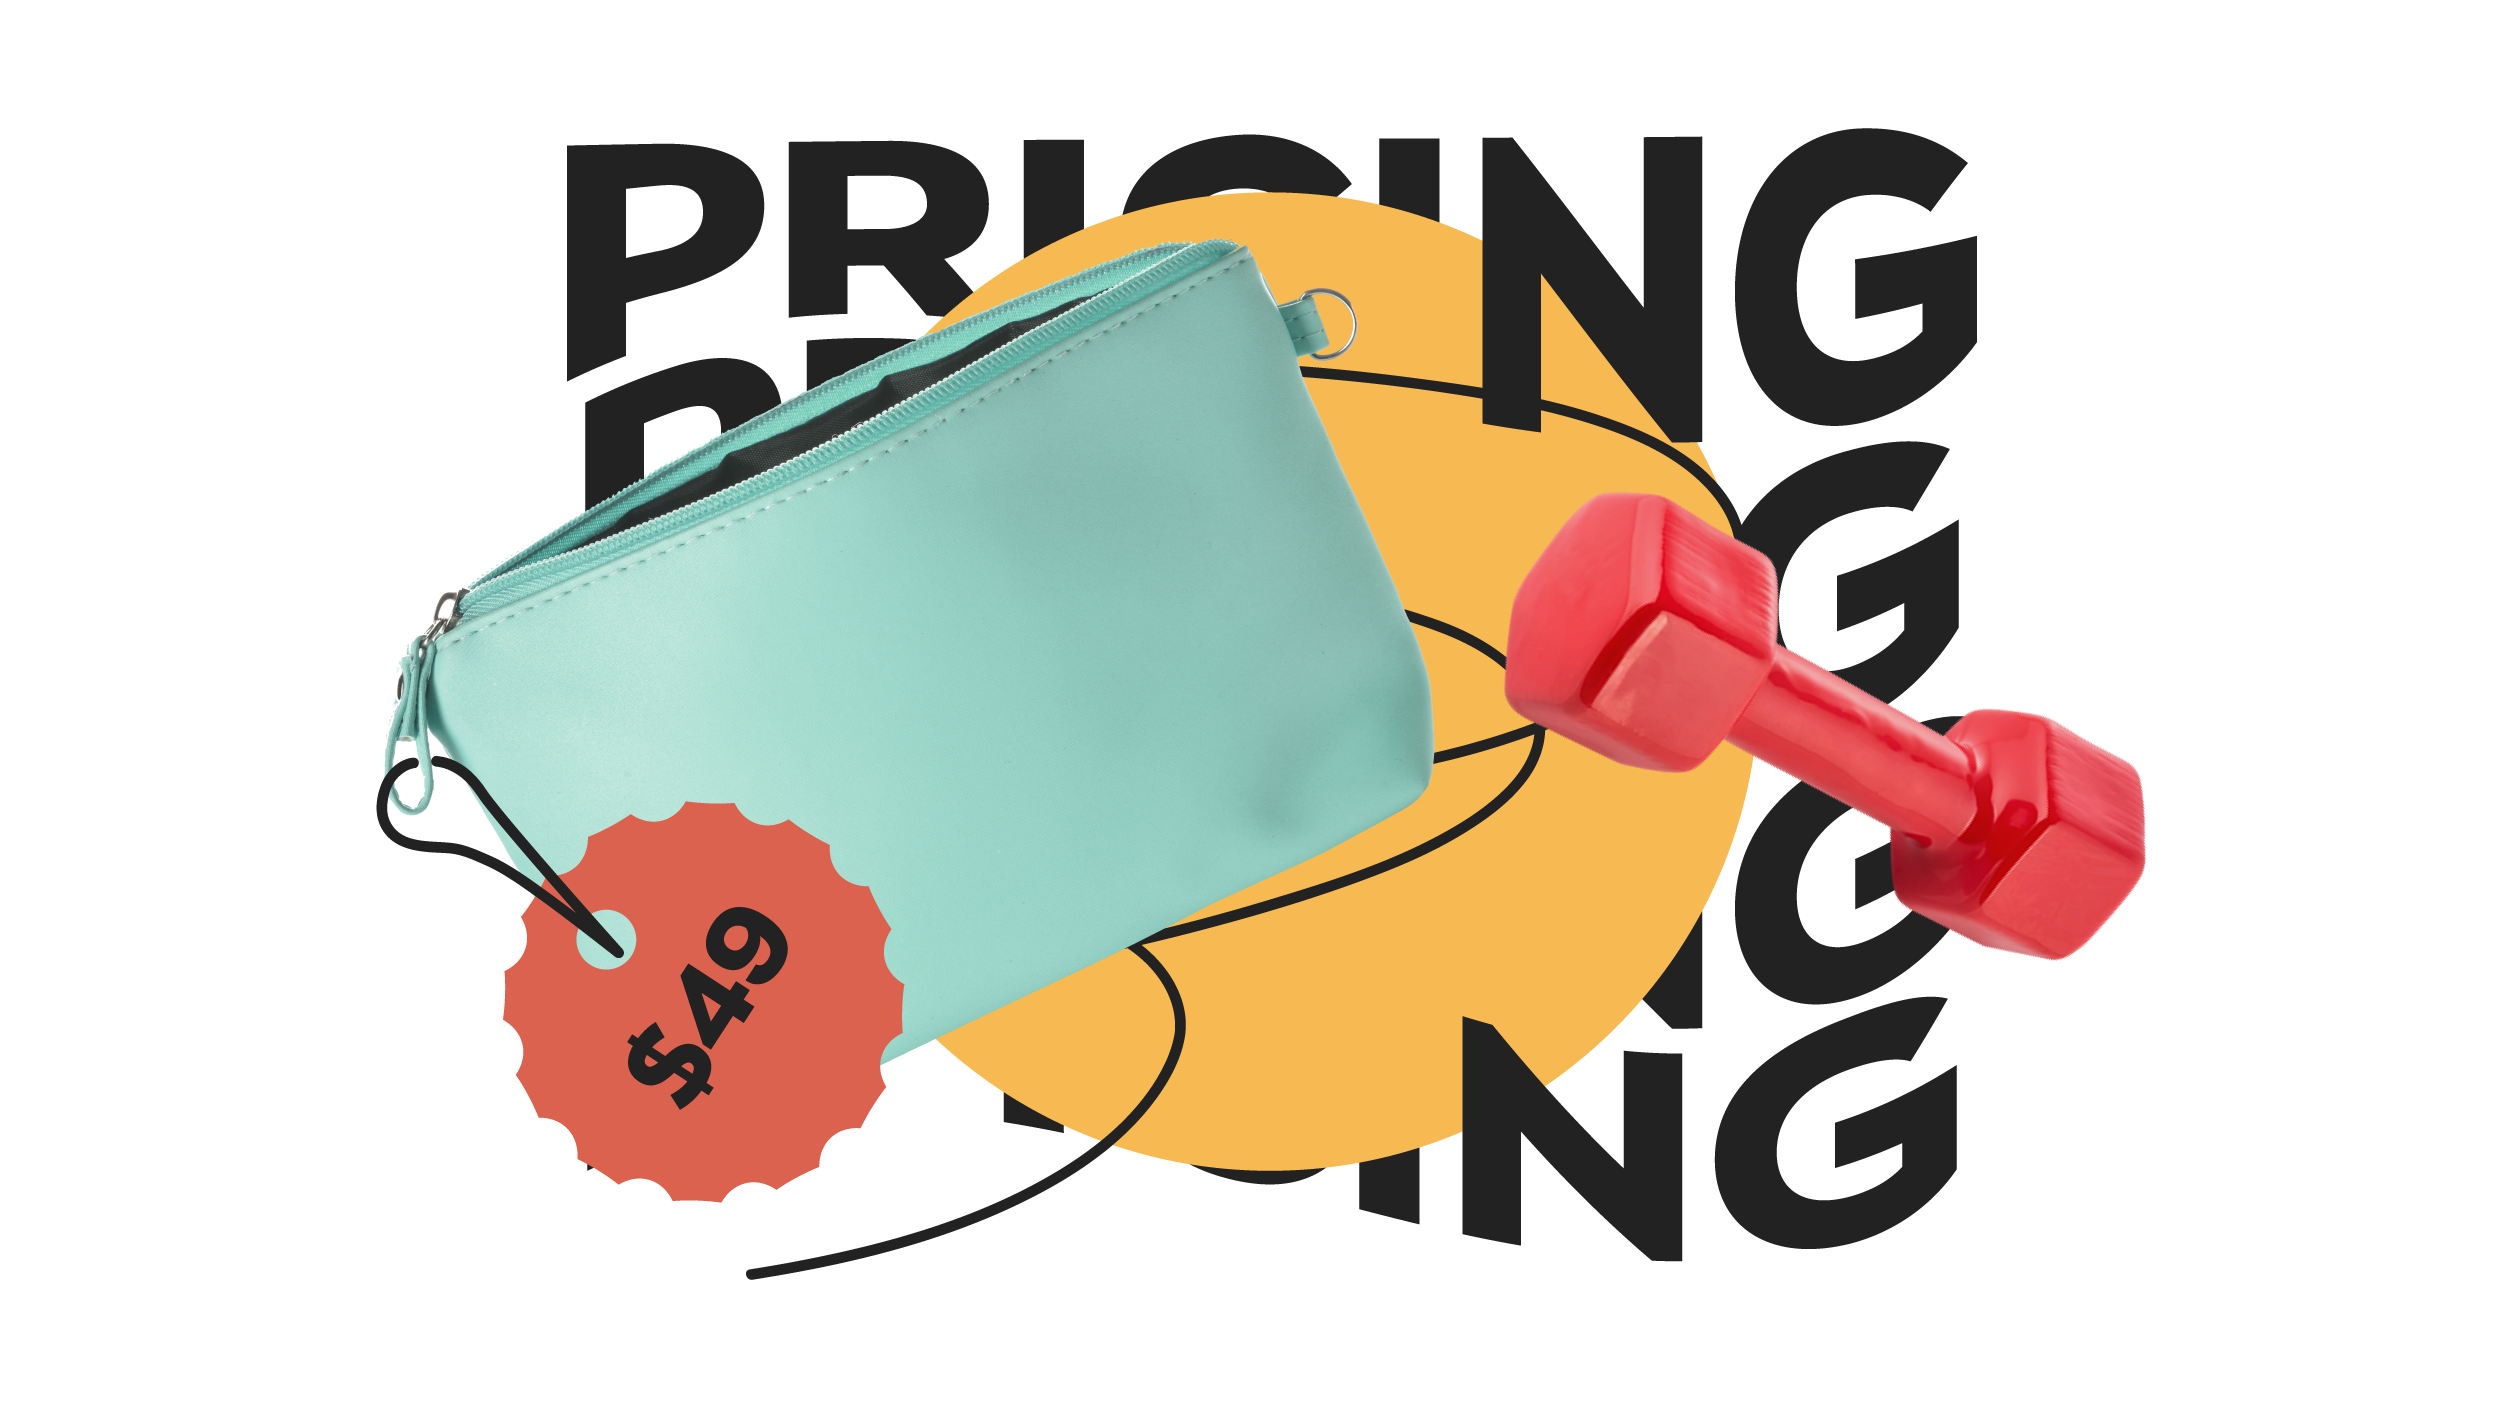 7 Pricing Strategies for Your Retail and Ecommerce Business